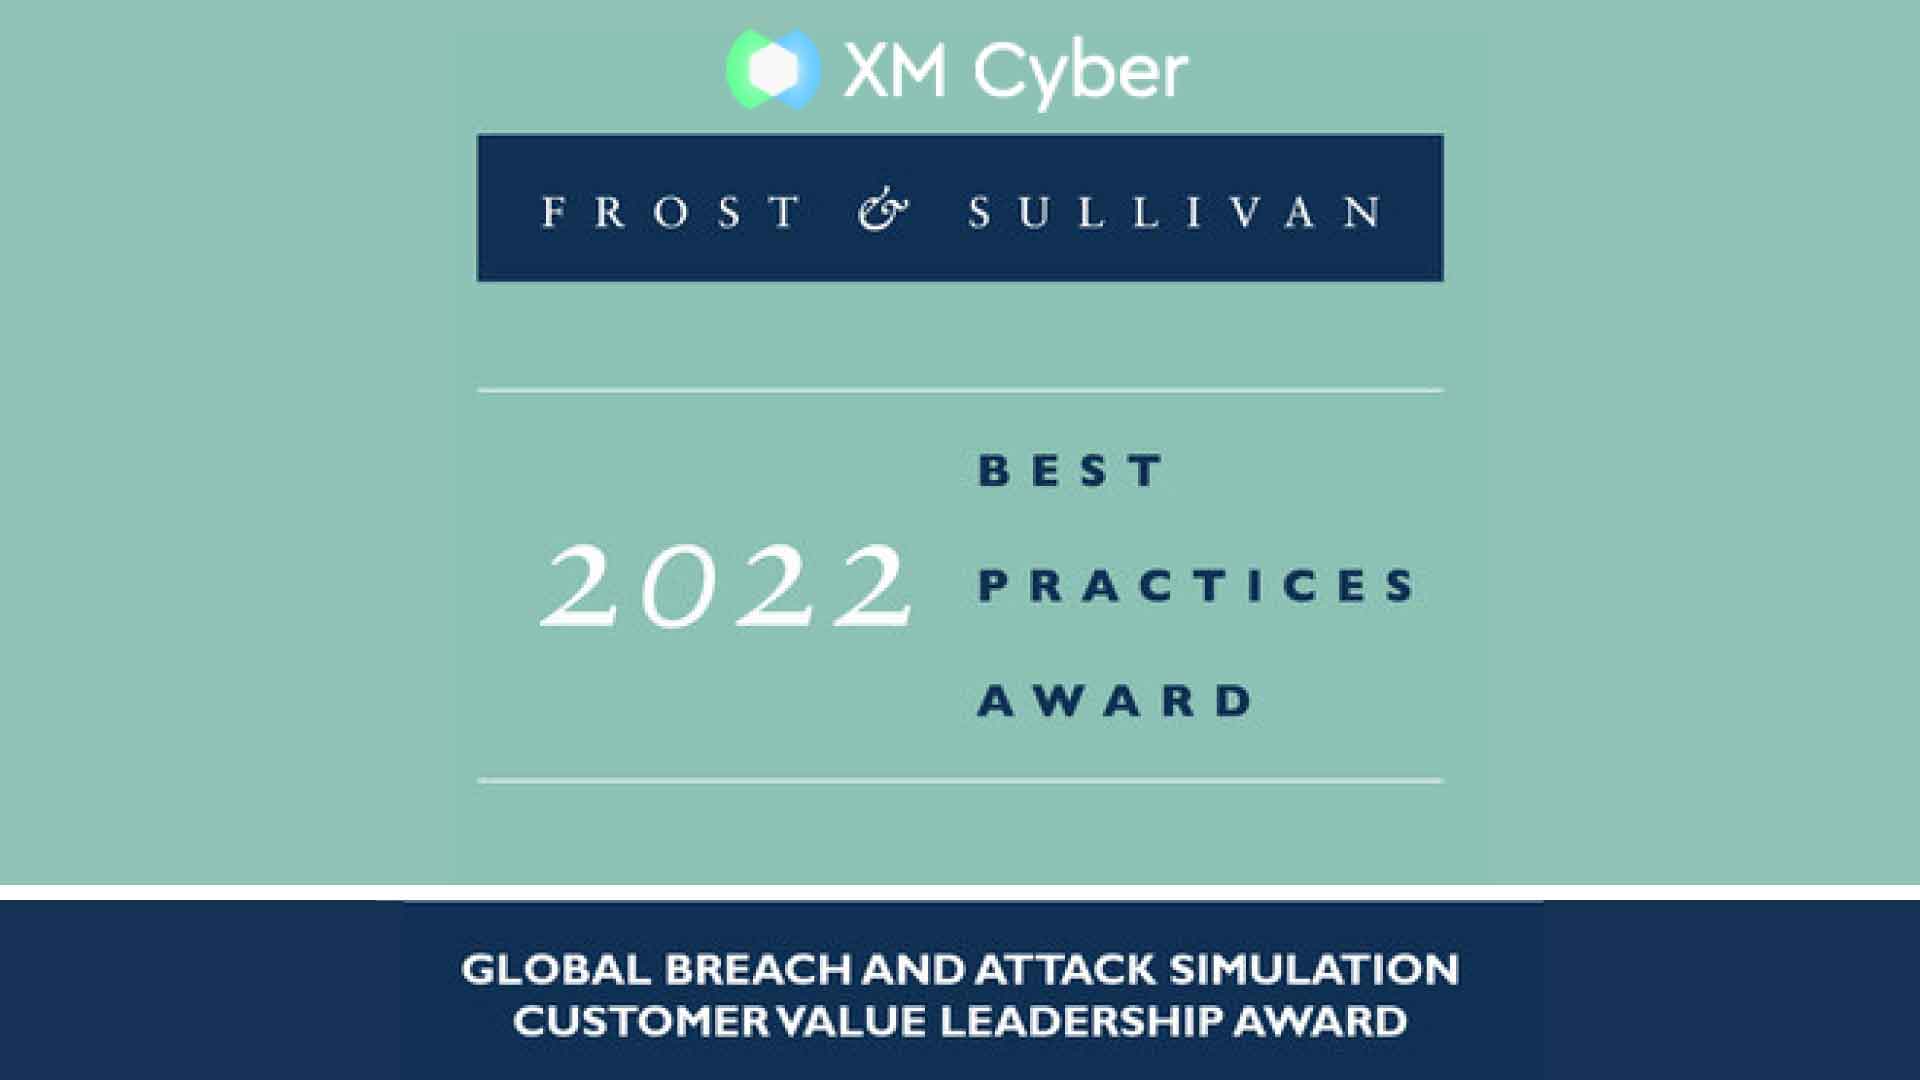 XM Cyber Recognized by Frost & Sullivan for Enabling a Single View of Security Risks Across the Hybrid Environment in Real Time and Providing Customer Value